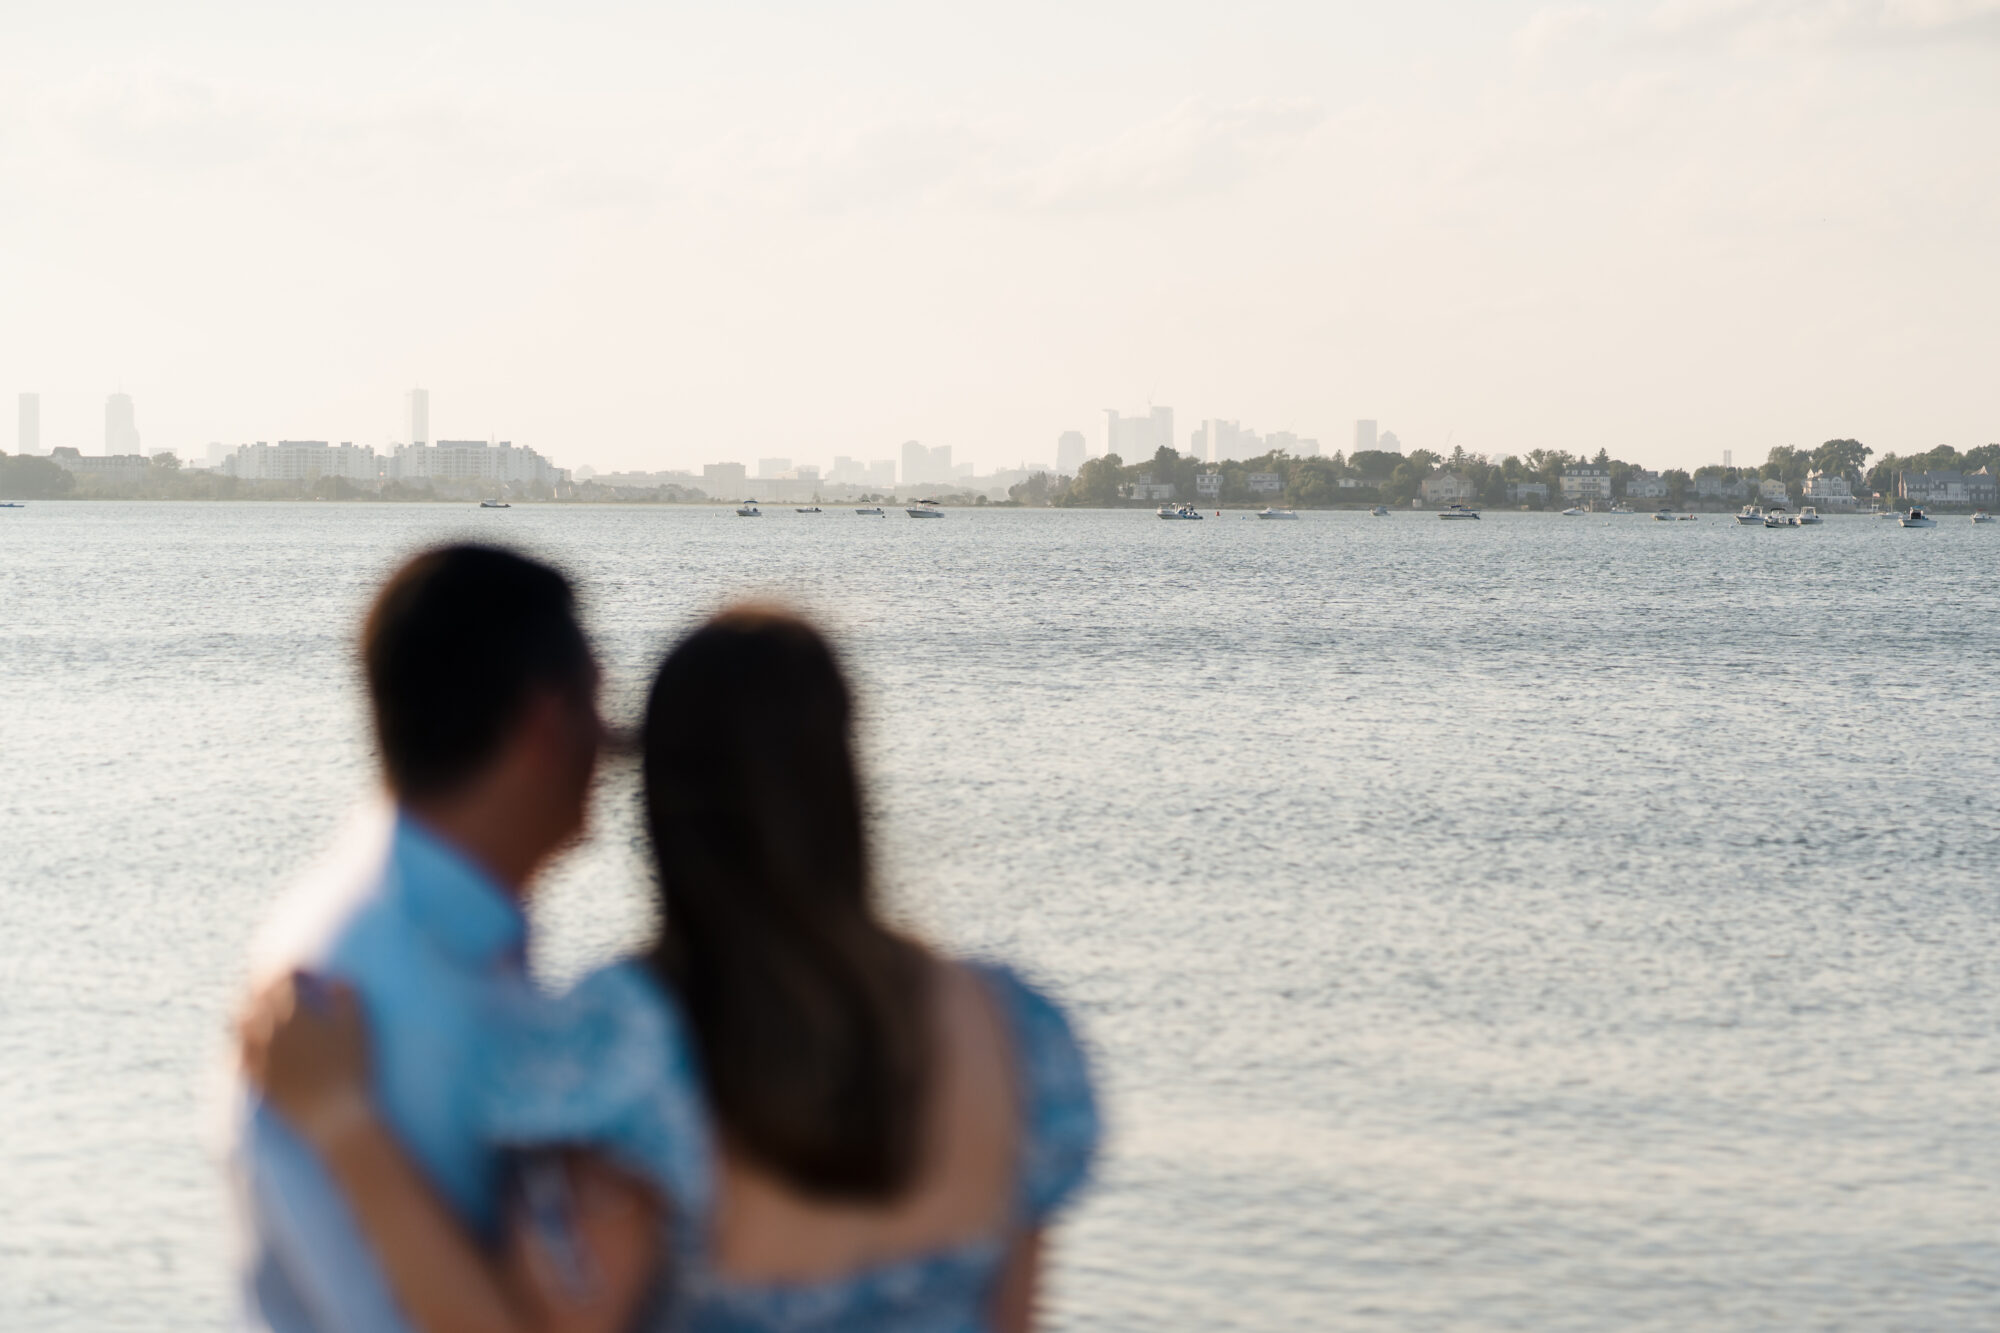 engagement session photos at wollaston beach in quincy, ma